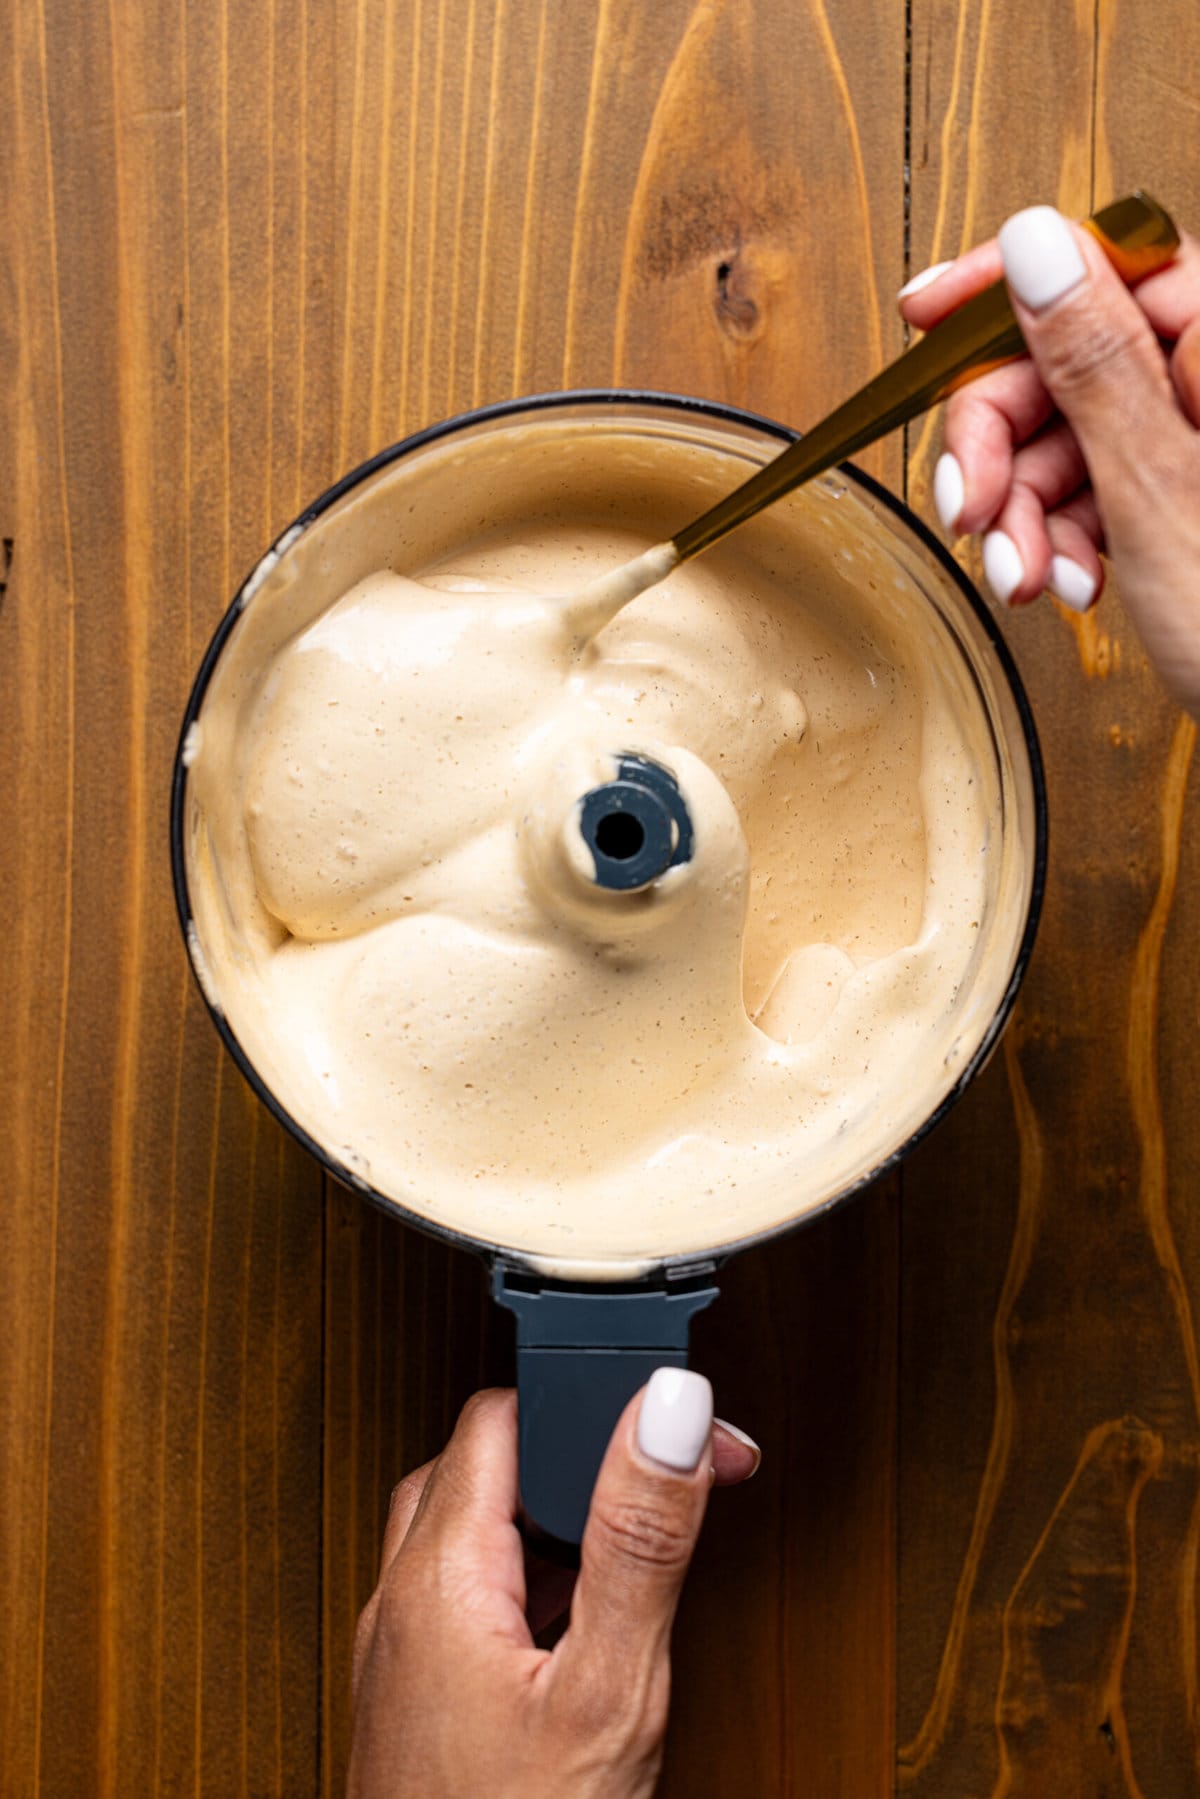 Whipped latte in a food processor with a spoon being held.